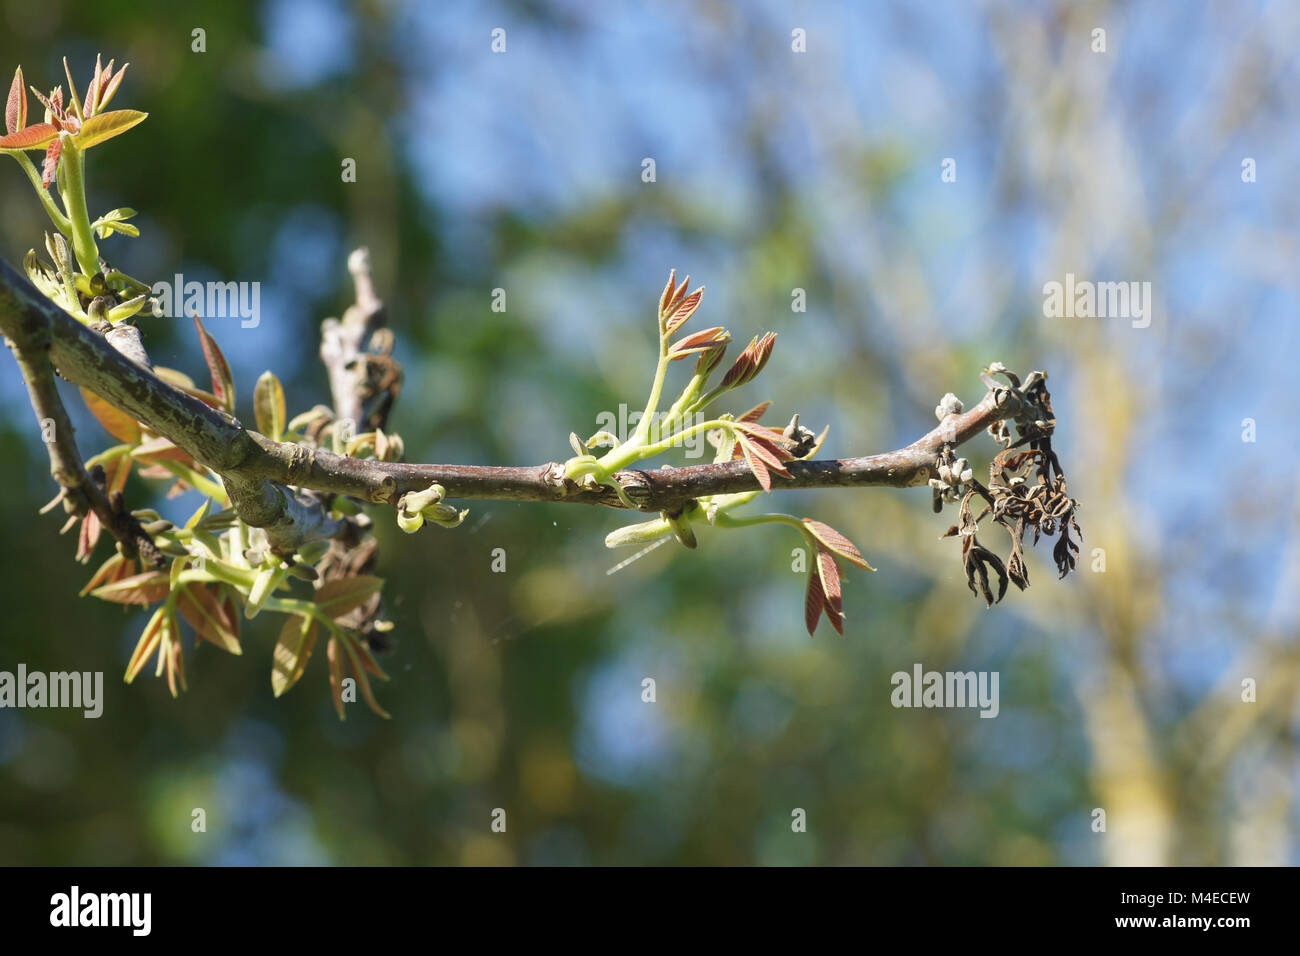 Juglans regia, Walnut, young shoots after frost damage Stock Photo